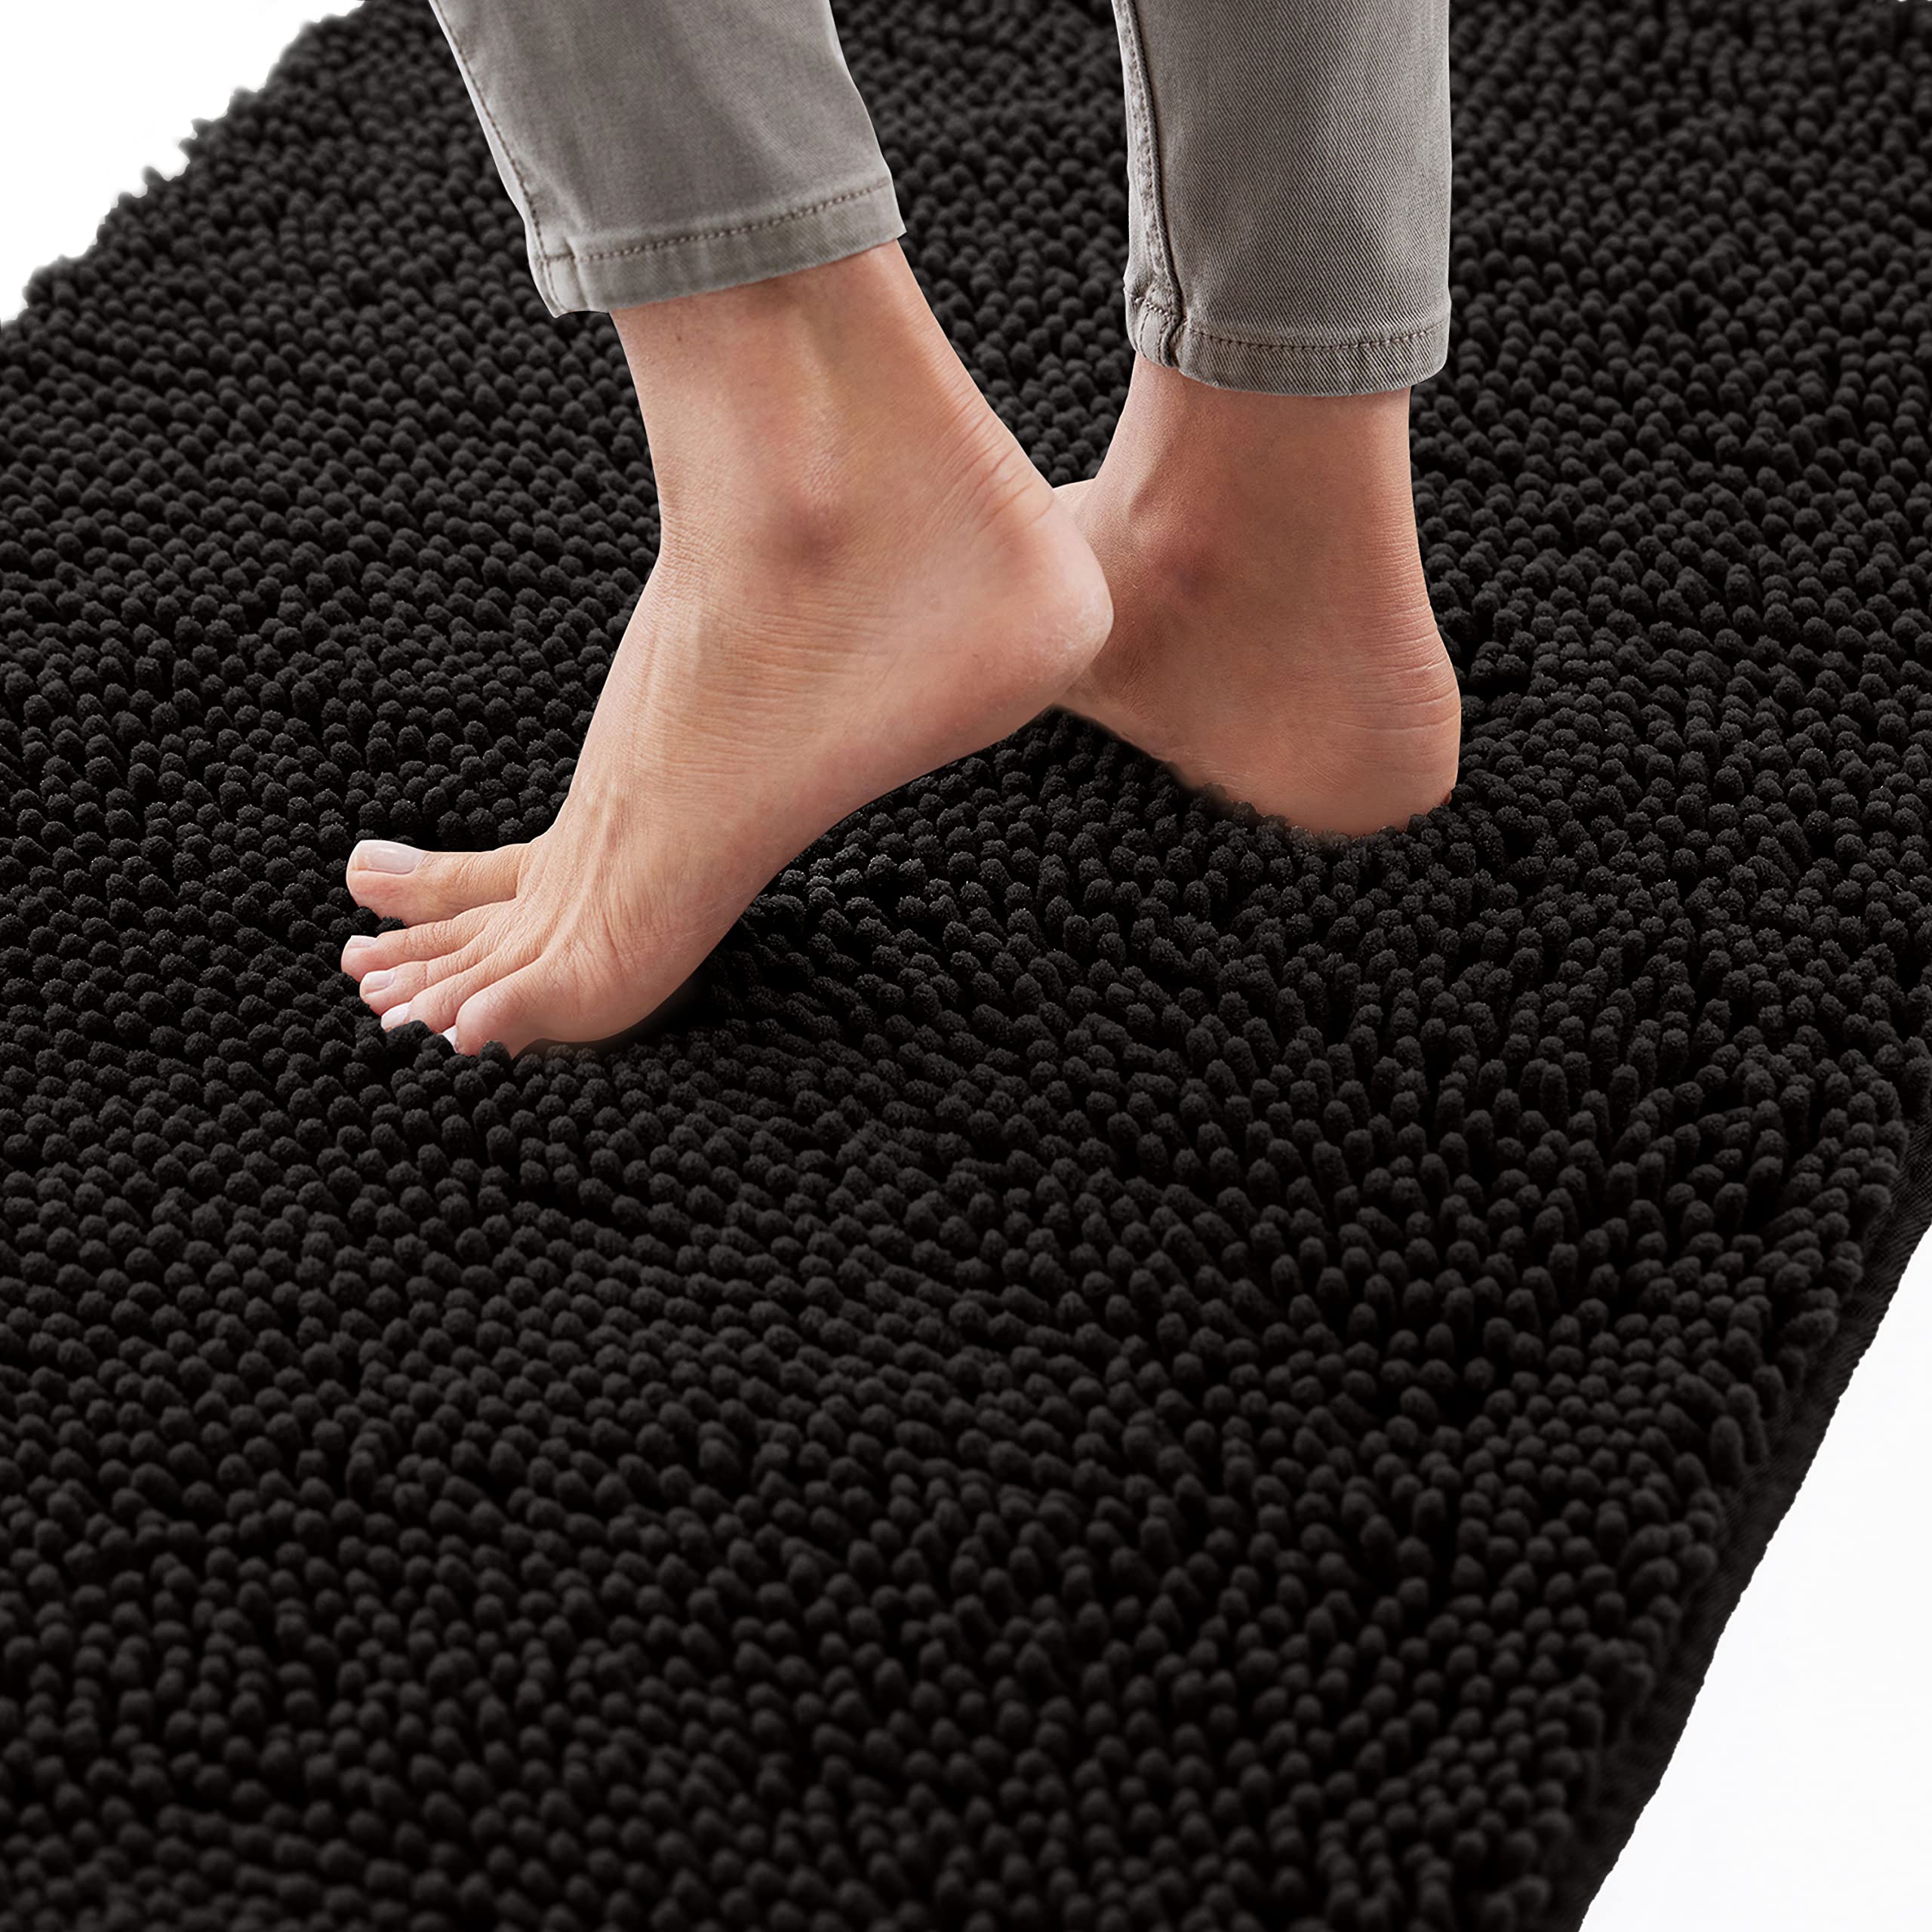 Book Cover Gorilla Grip Bath Rug 44x26, Thick Soft Absorbent Chenille, Rubber Backing Quick Dry Microfiber Mats, Machine Washable Rugs for Shower Floor, Bathroom Runner Bathmat Accessories Decor, Black 44